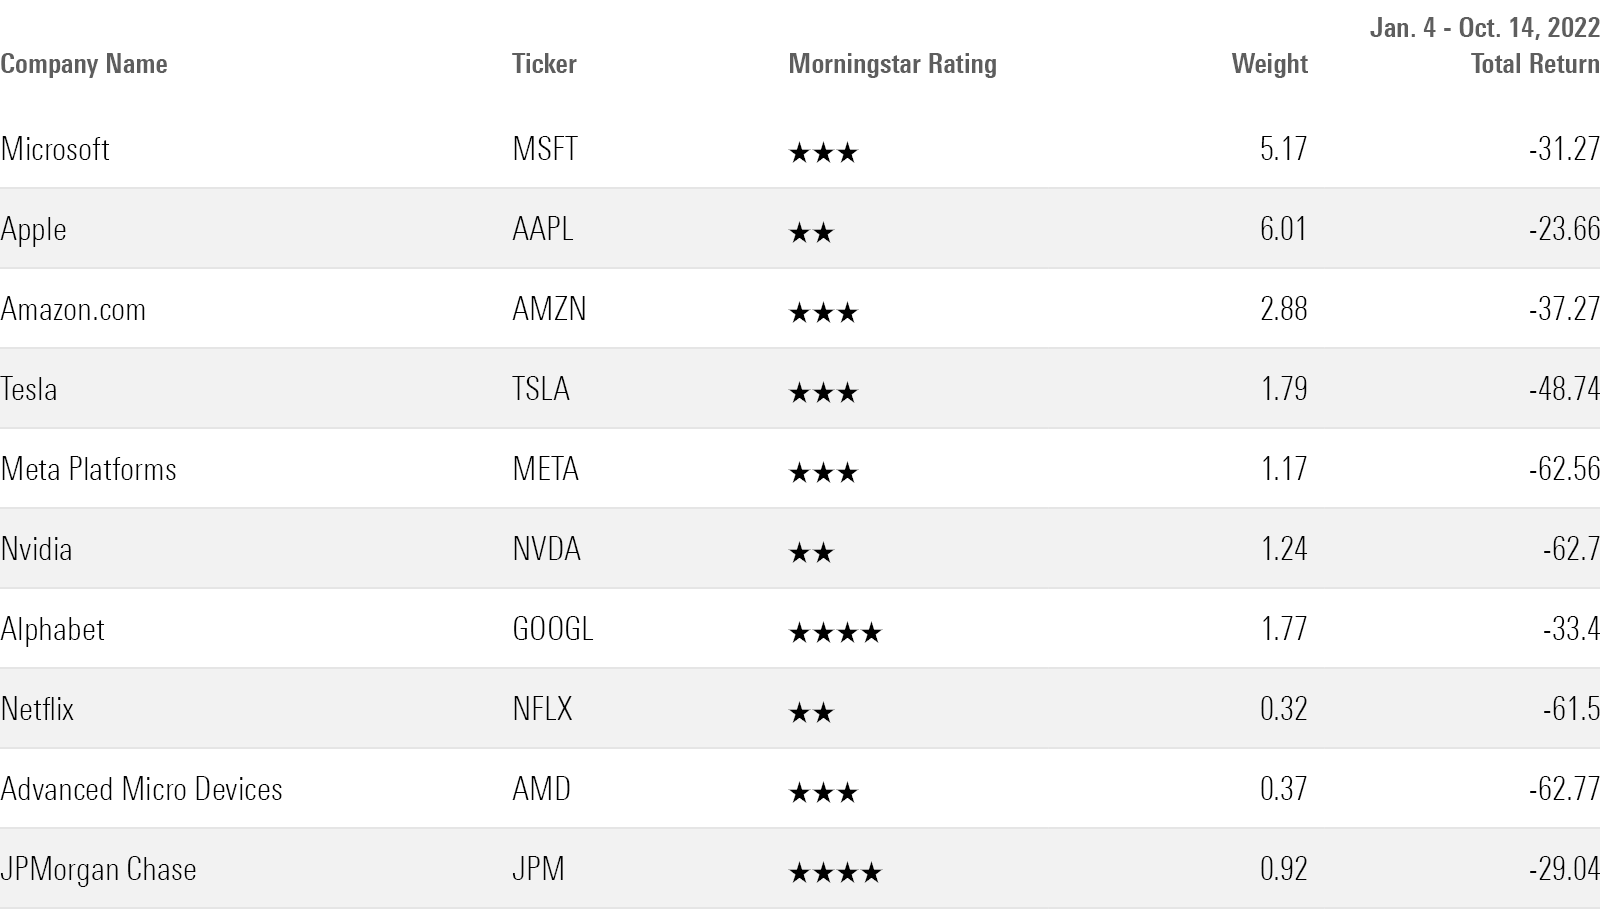 Table listing companies that dragged down the Morningstar US Market Index the most during the 2022 bear market.